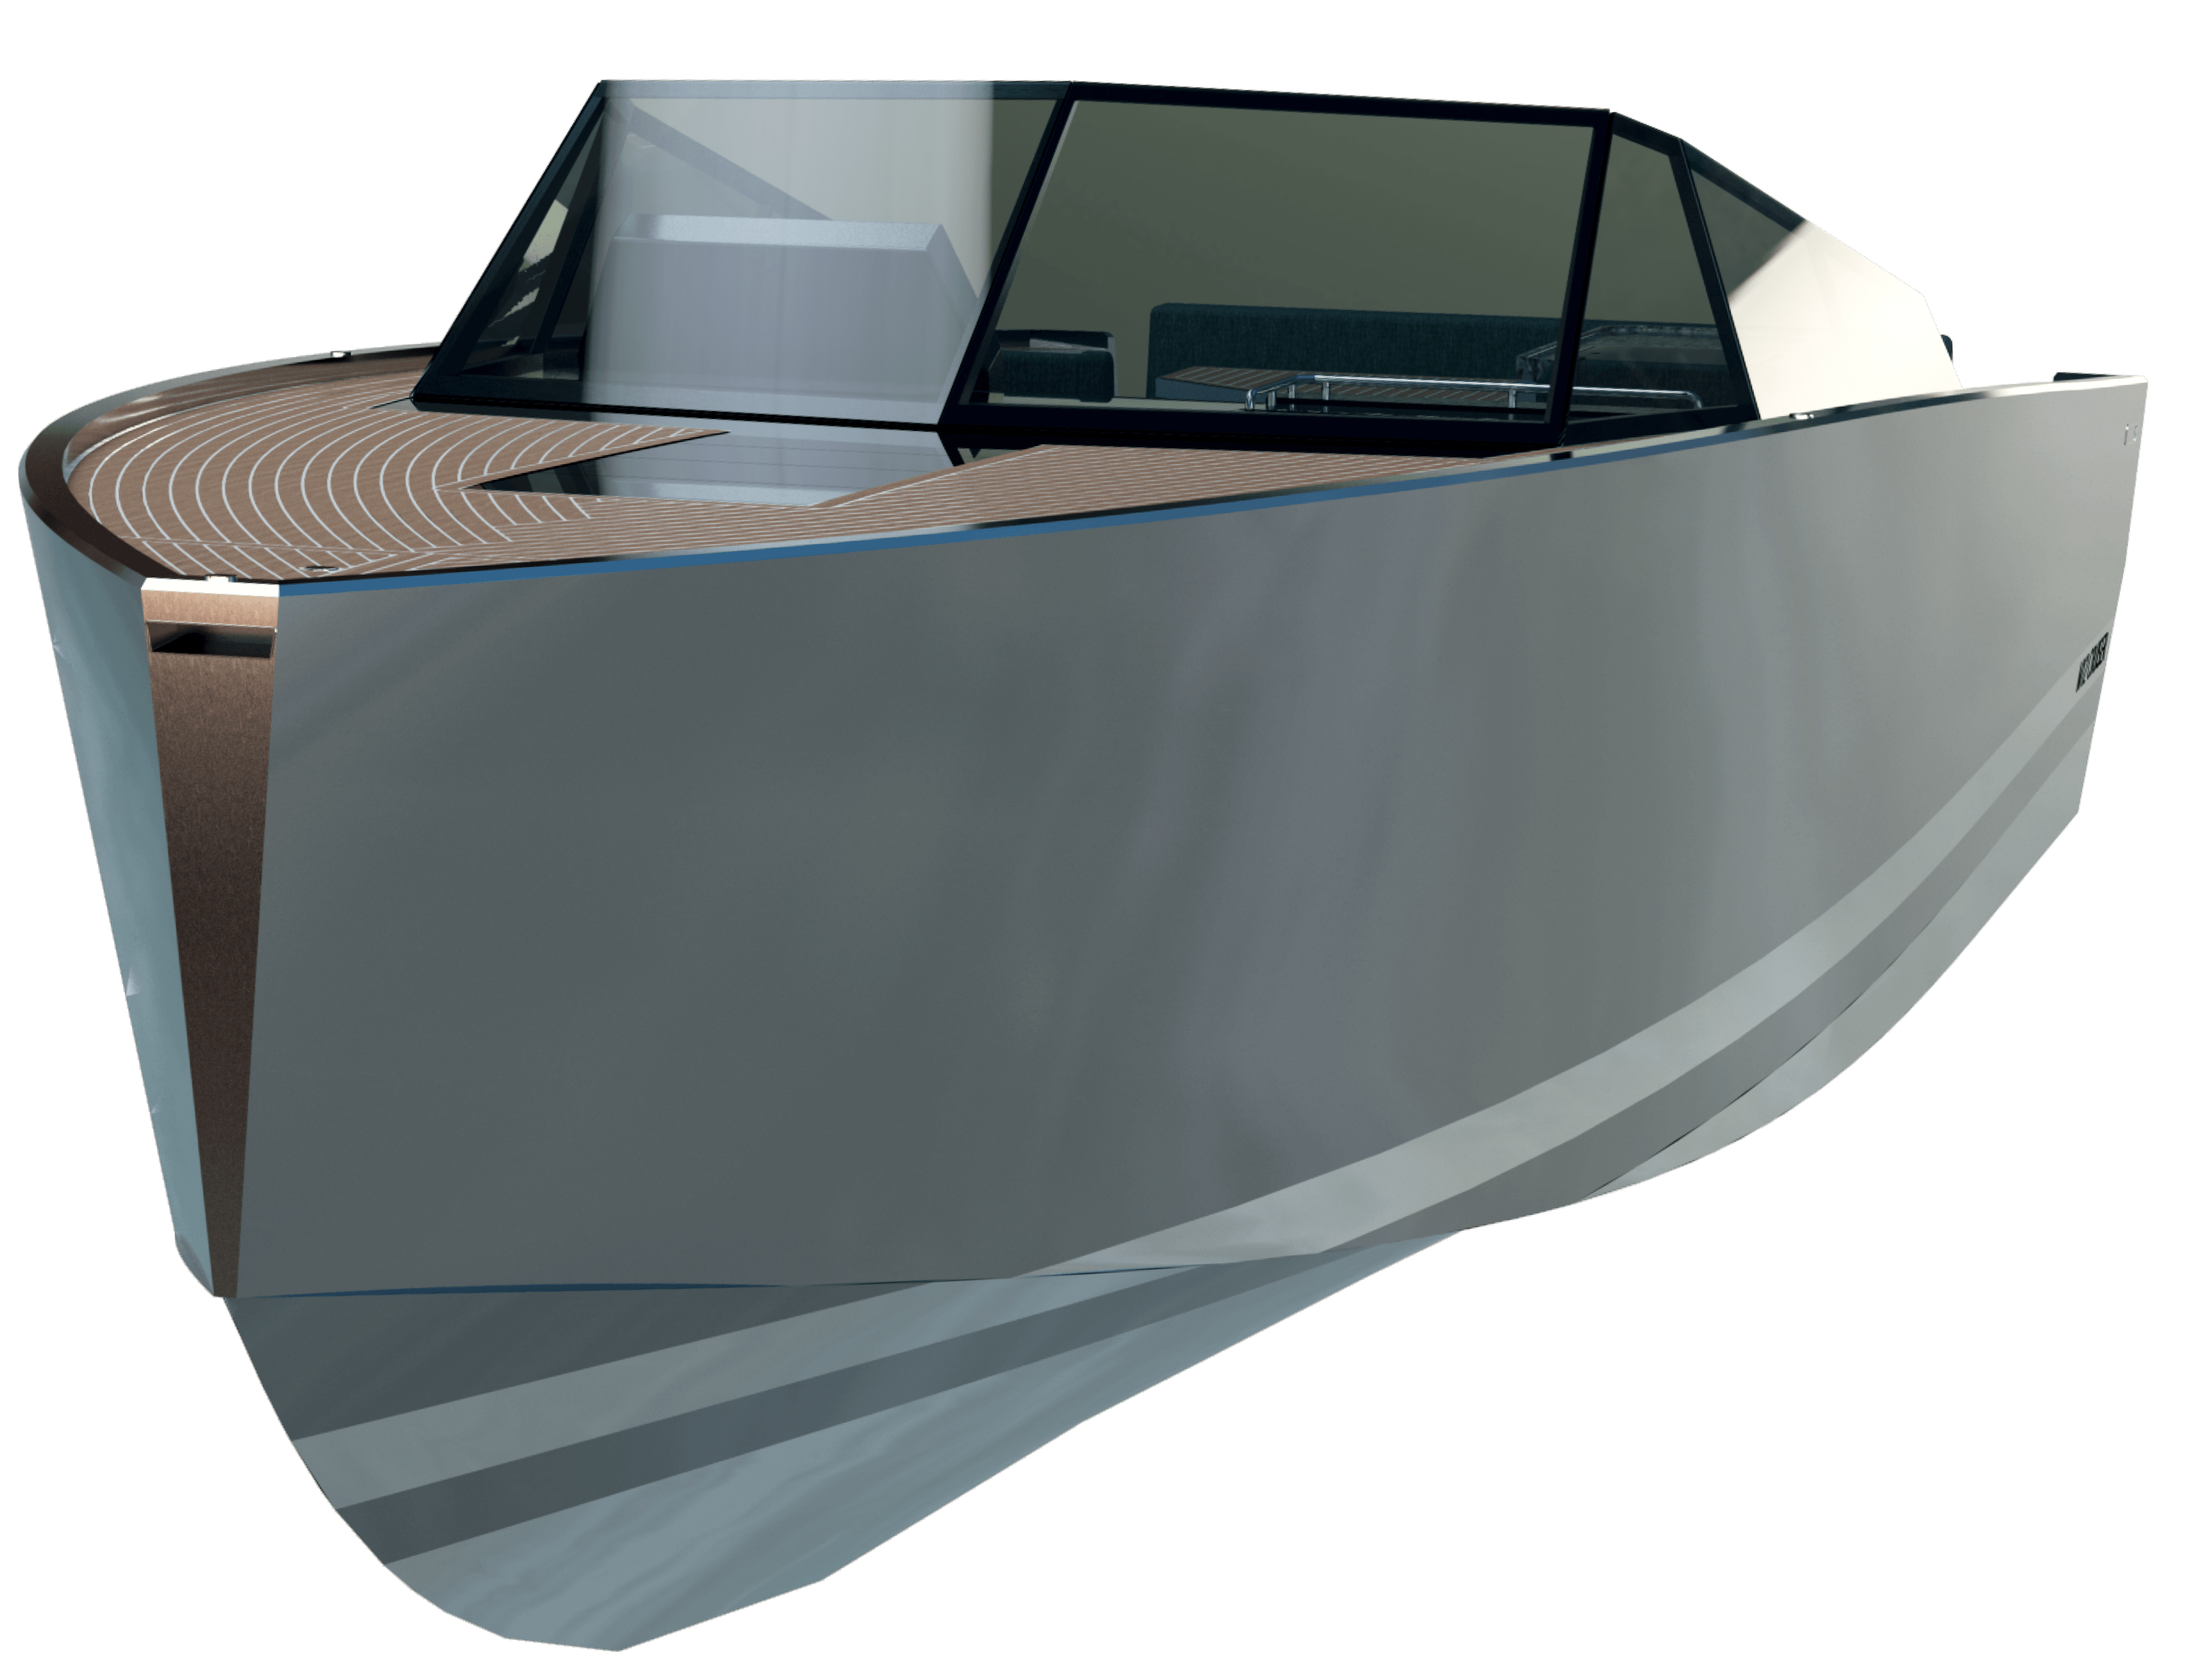 SSY Platform - Stainless Steel Hull Construction